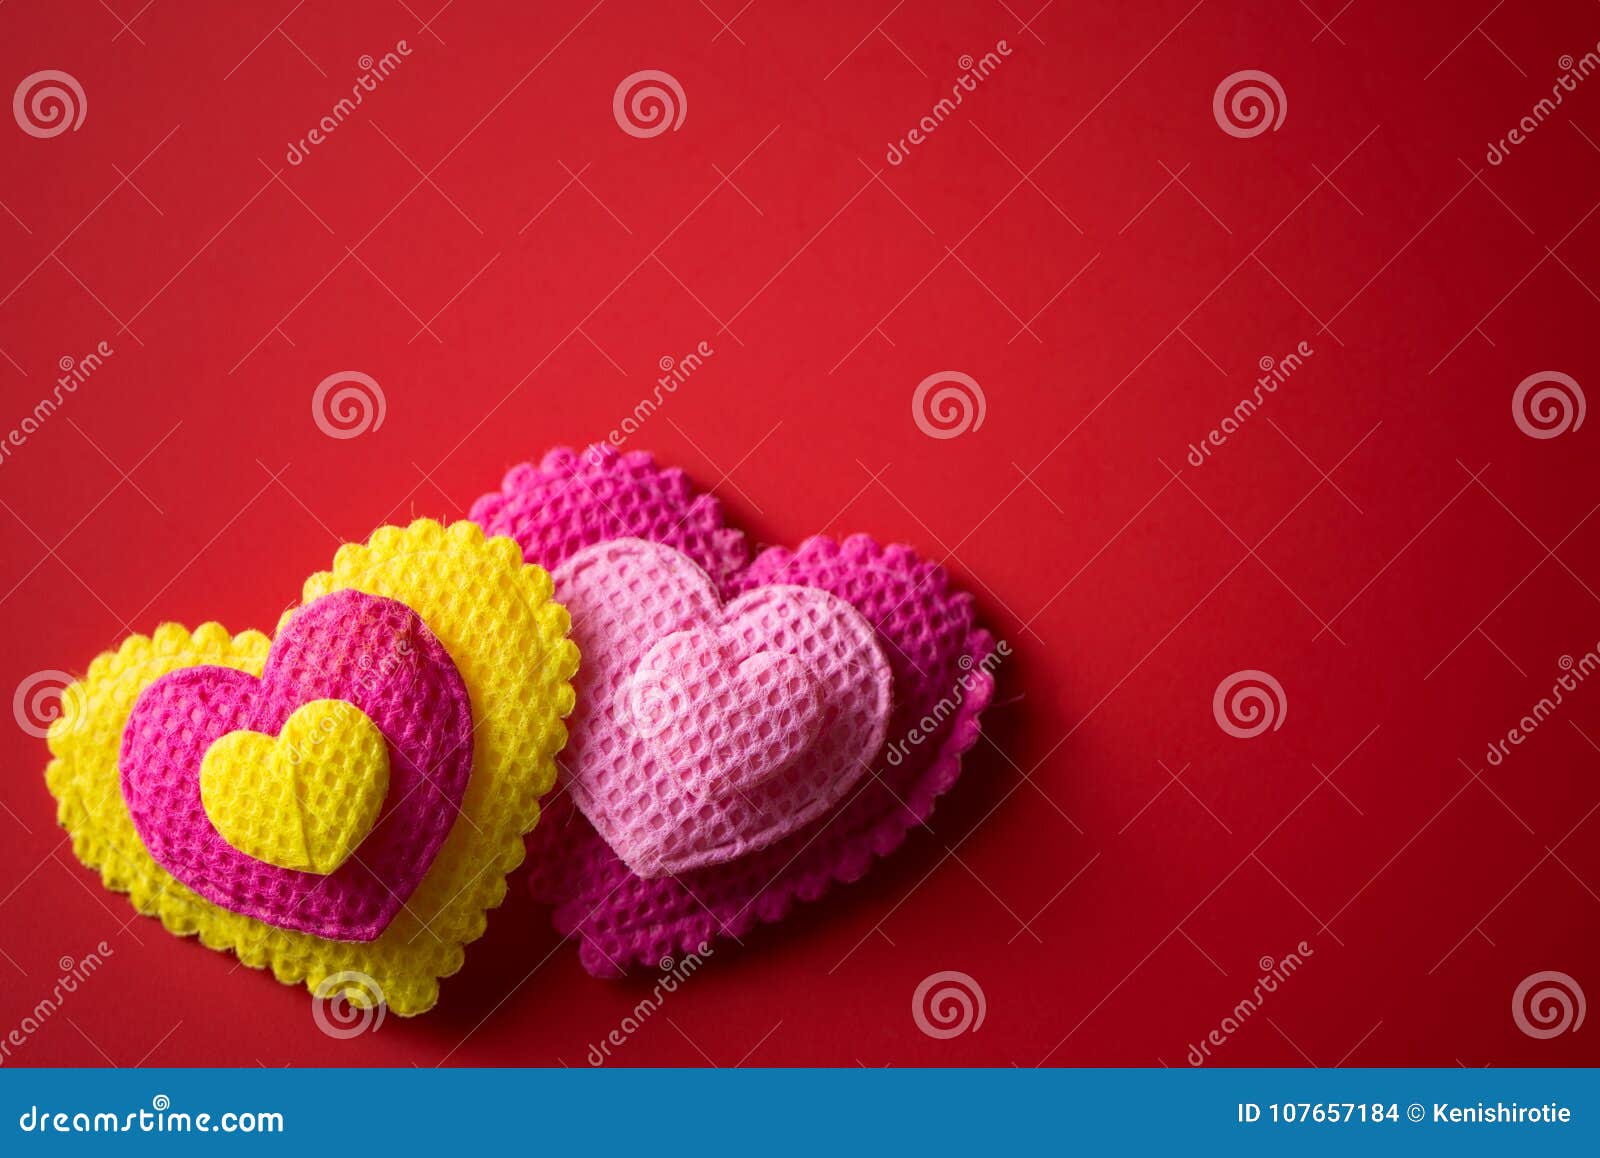 249,054 Happy Valentines Day Stock Photos - Free & Royalty-Free Stock  Photos from Dreamstime